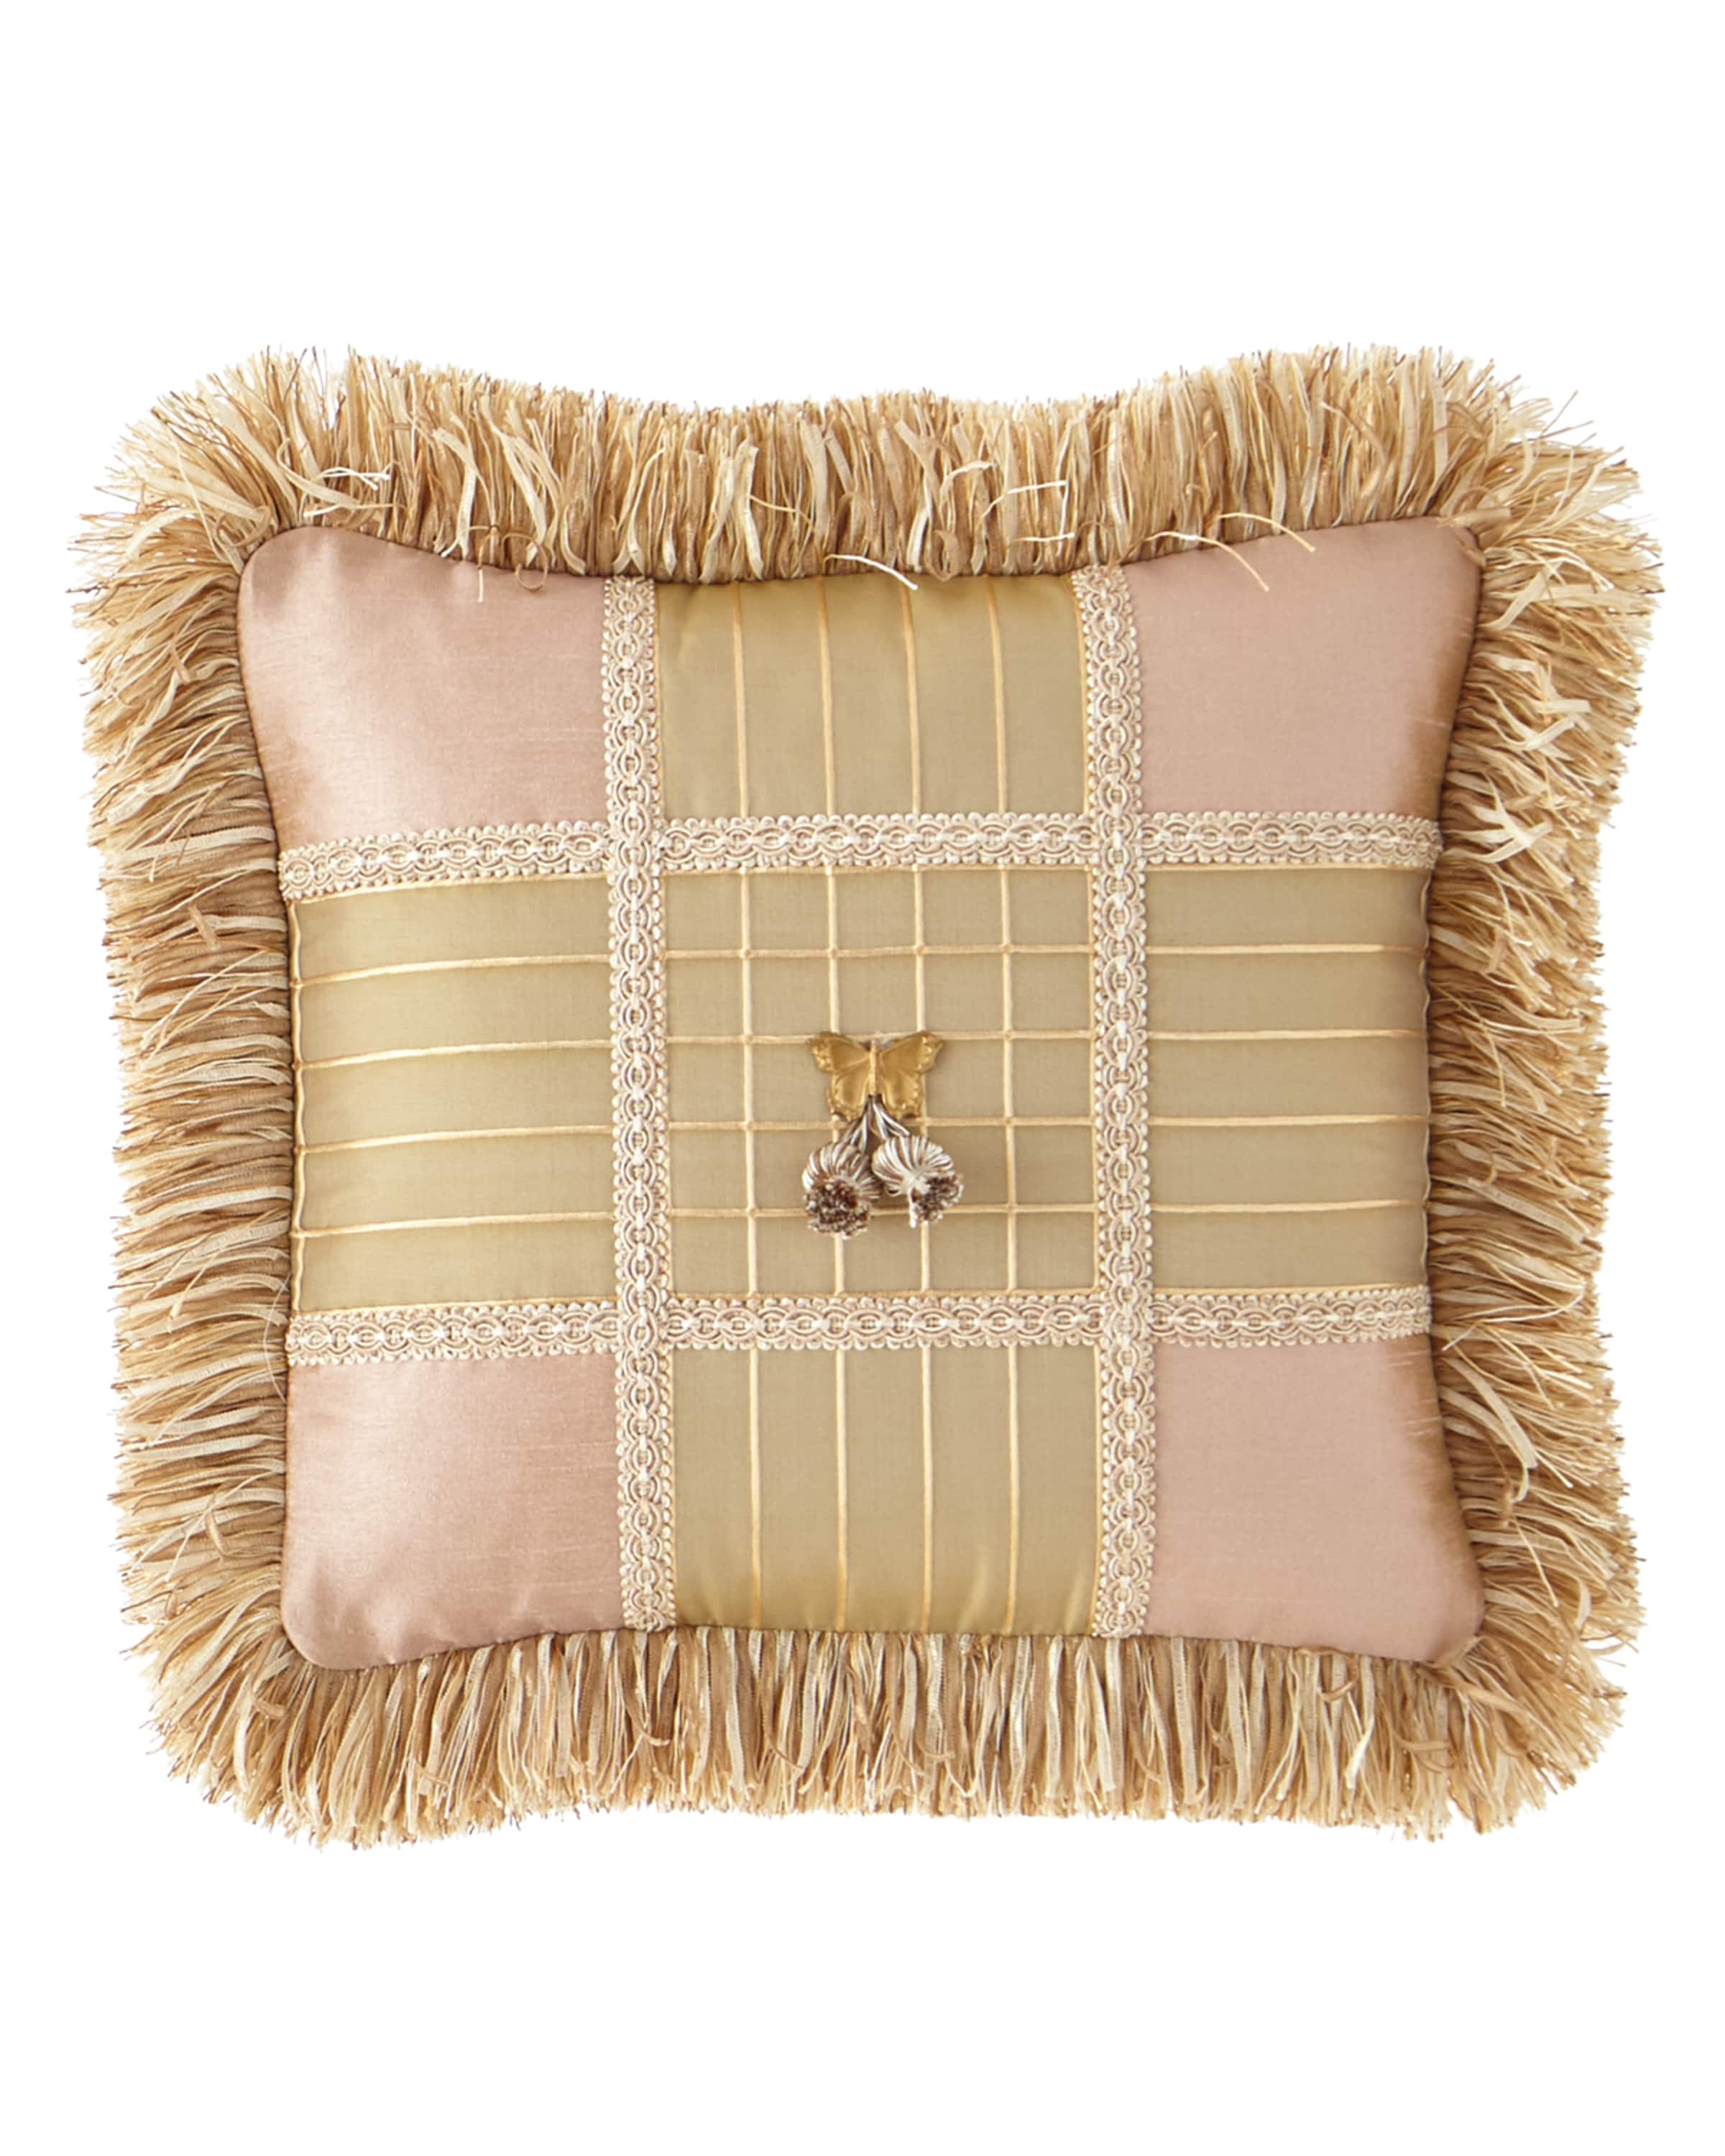 Sweet Dreams Delilah Square Pillow with Butterfly Center